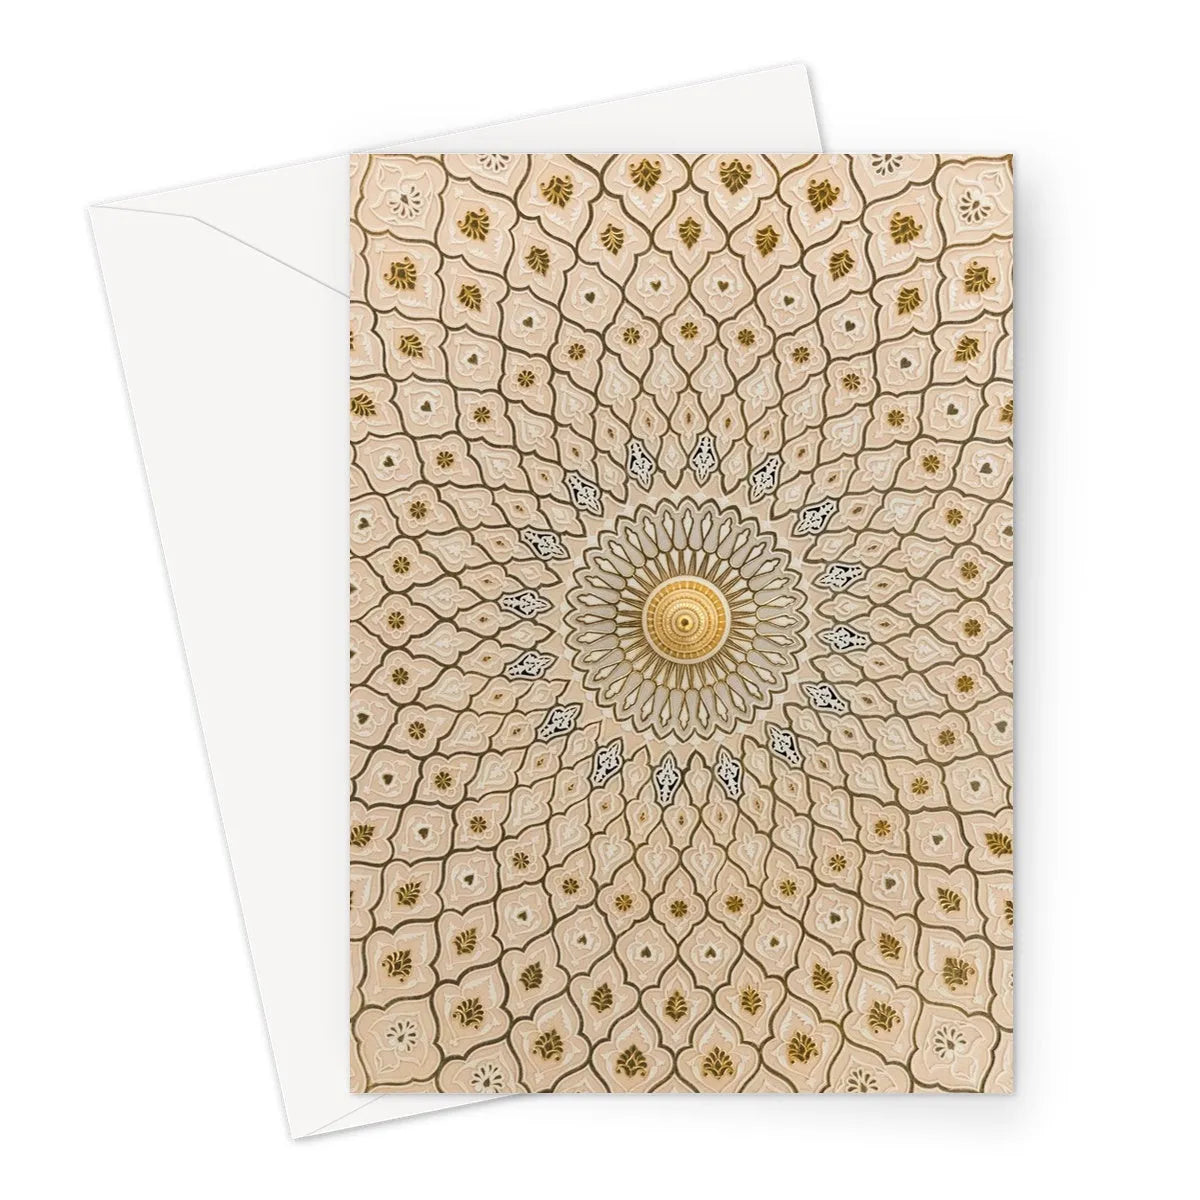 Divine Order Greeting Card - A5 Portrait / 1 Card - Greeting & Note Cards - Aesthetic Art